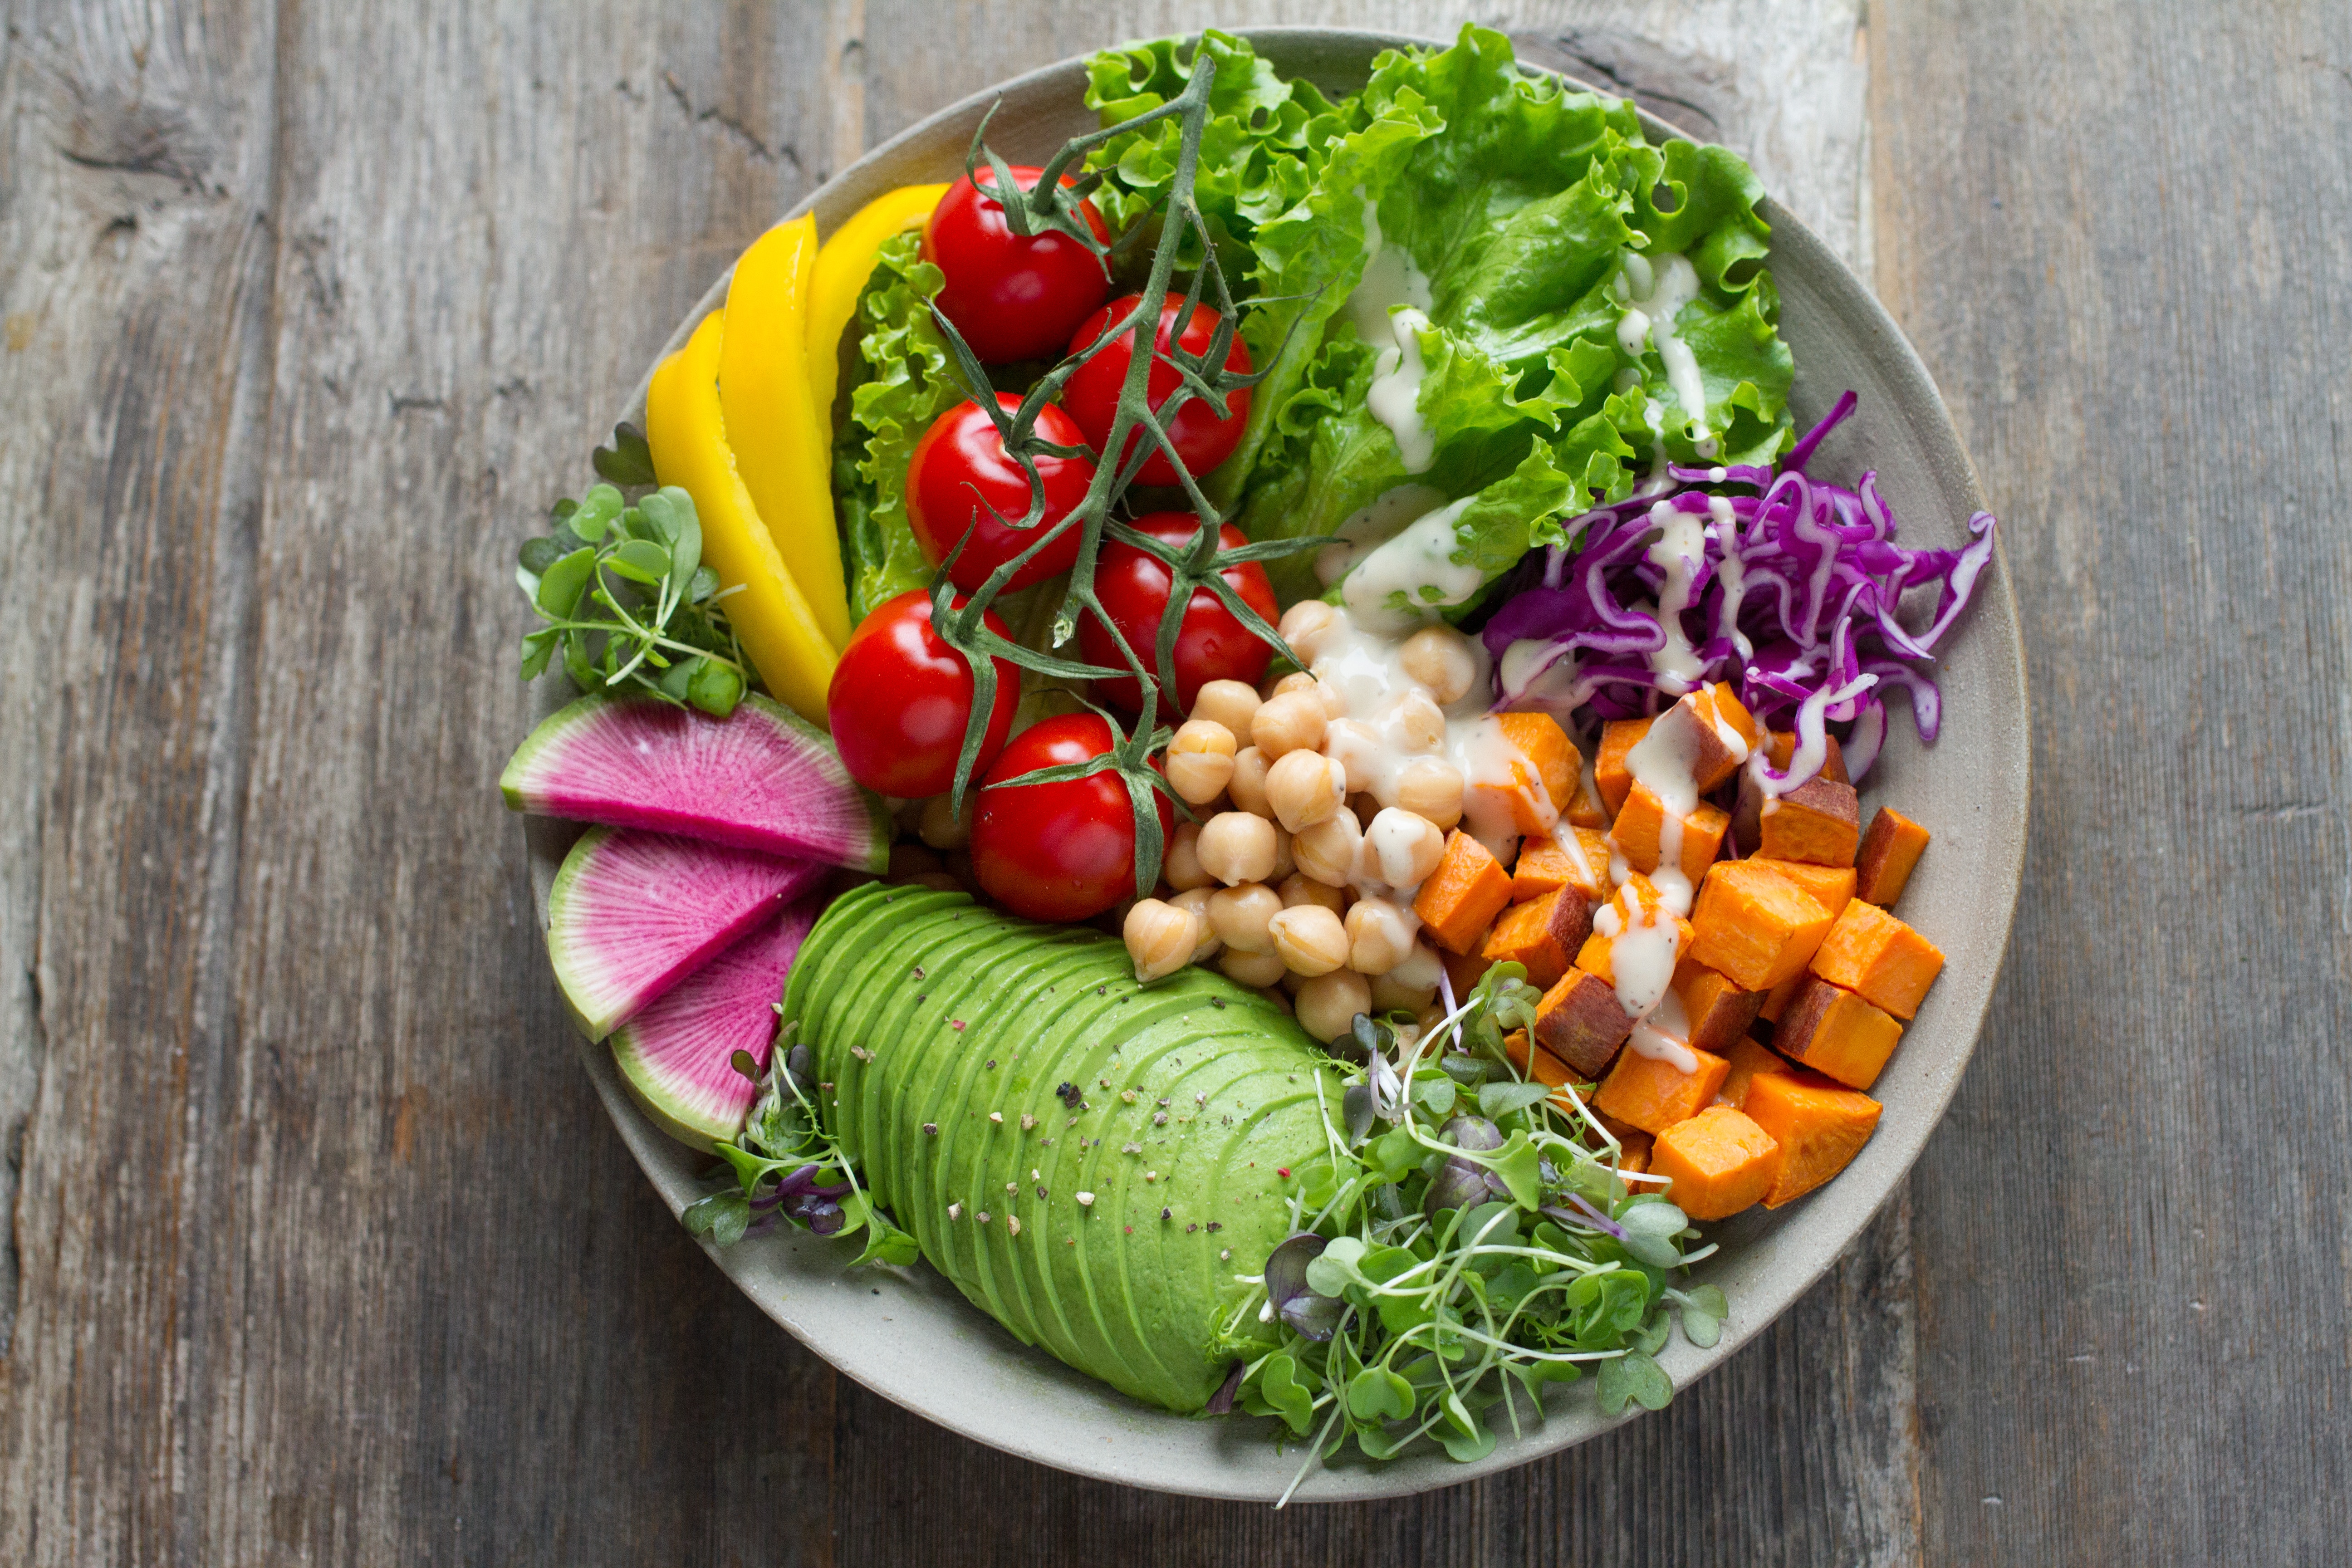 7 Key Vitamin and Nutrient Boosters for Vegetarians